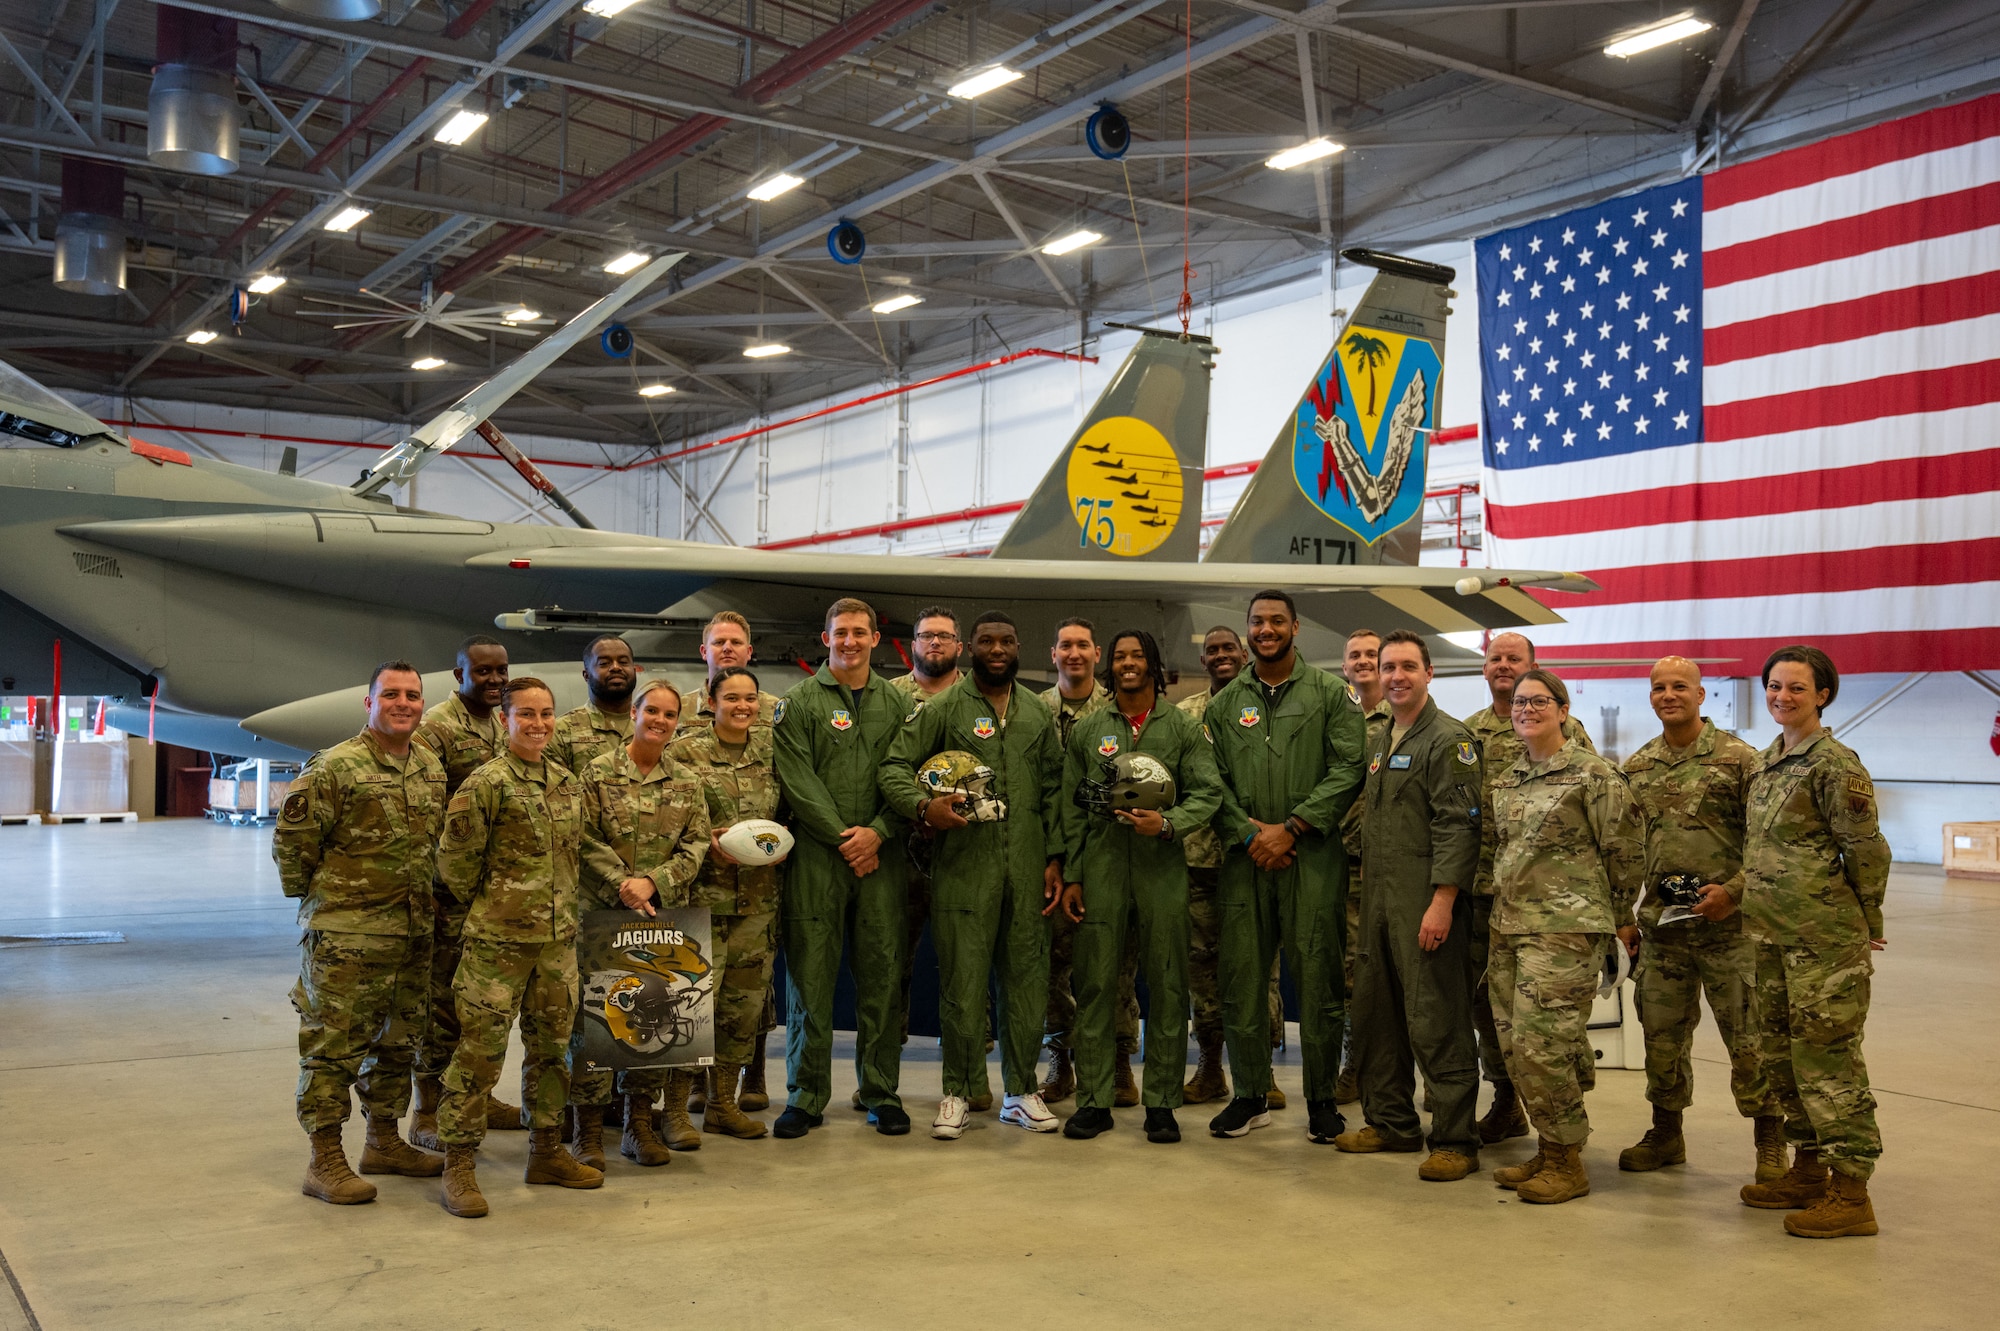 Officials at the 125th Fighter Wing welcomed players from the Jacksonville Jaguars for a base tour Nov. 7, 2023 at Jacksonville Air National Guard Base, Florida. The players included linebackers Chad Muma and Dequan Jackson, defensive lineman De’Shaan Dixon, and defensive back Christian Braswell. During the tour, the players learned of the war fighting capabilities of the F-15C Eagle, donned aircrew flight equipment, viewed a static F-15 display, and engaged with Airmen from around the wing. The tour supported efforts to establish positive relationships, enhance public understanding, and promote mutual support between the 125th Fighter Wing and the local communities in which it operates. (U.S. Air National Guard photo by Tech Sgt. Chelsea Smith)